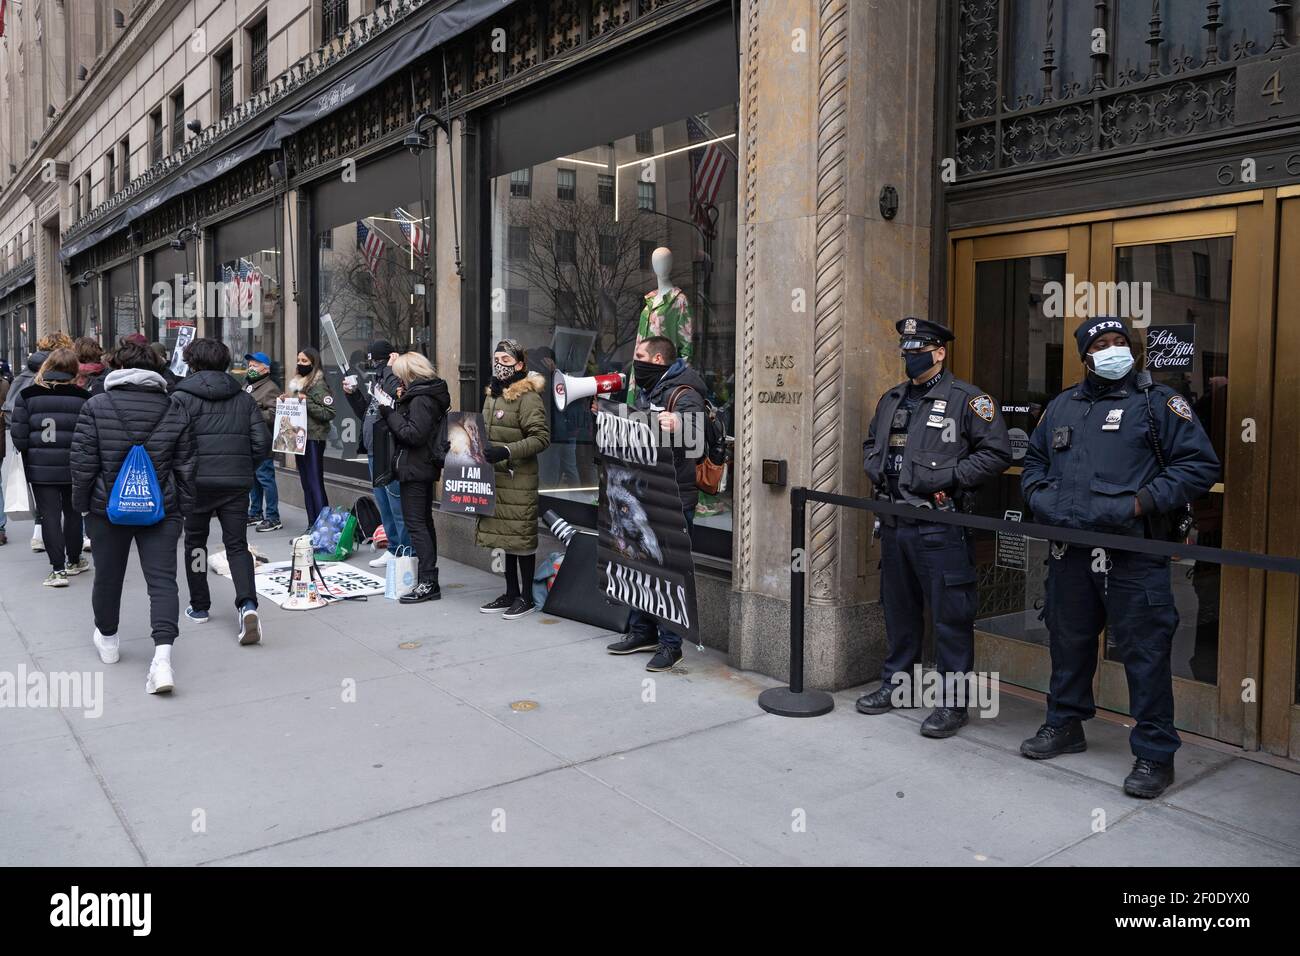 NEW YORK, NY - MARCH 6: NYPD Police Officers secure the store entrances  during a Canada Goose protest in front of Saks Fifth Avenue flagship Store  on March 6, 2021 in New